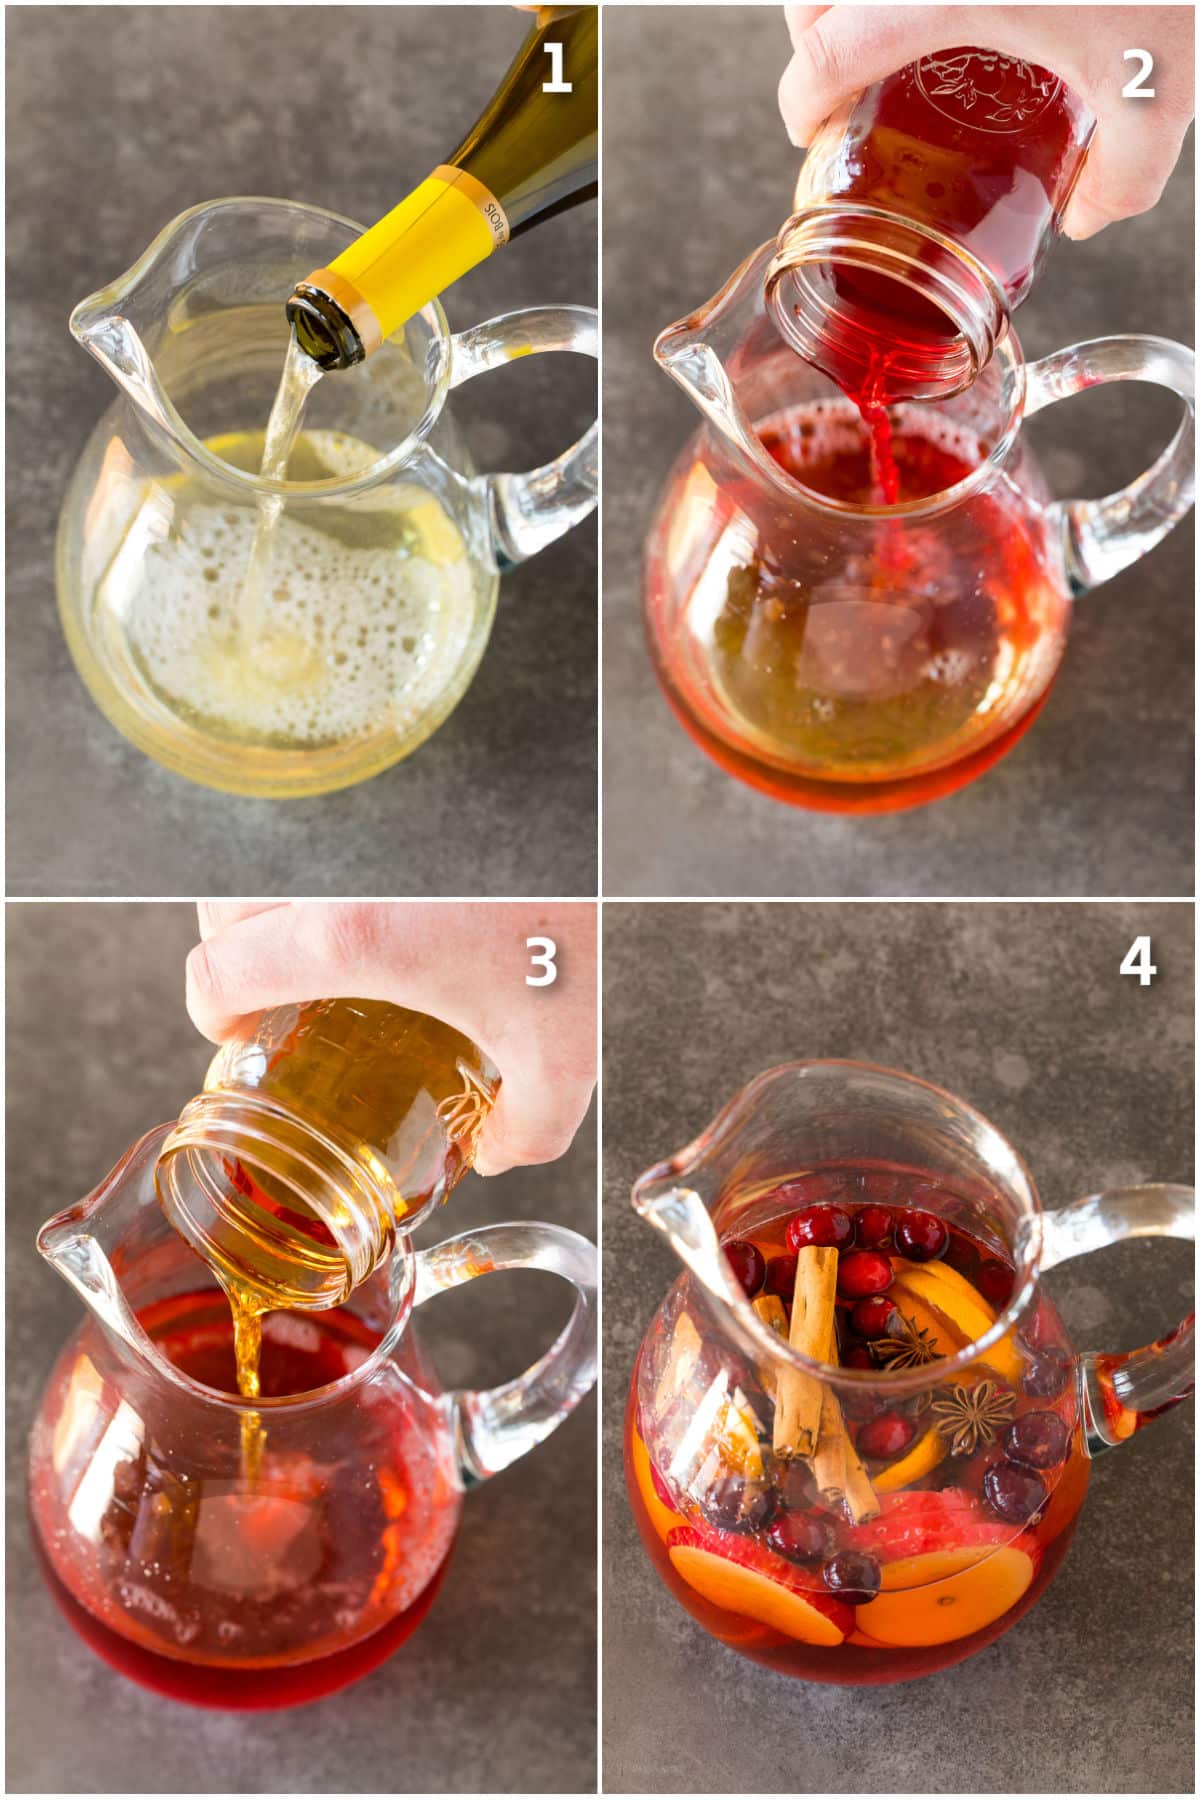 Wine, juice and brandy being poured into a glass pitcher.